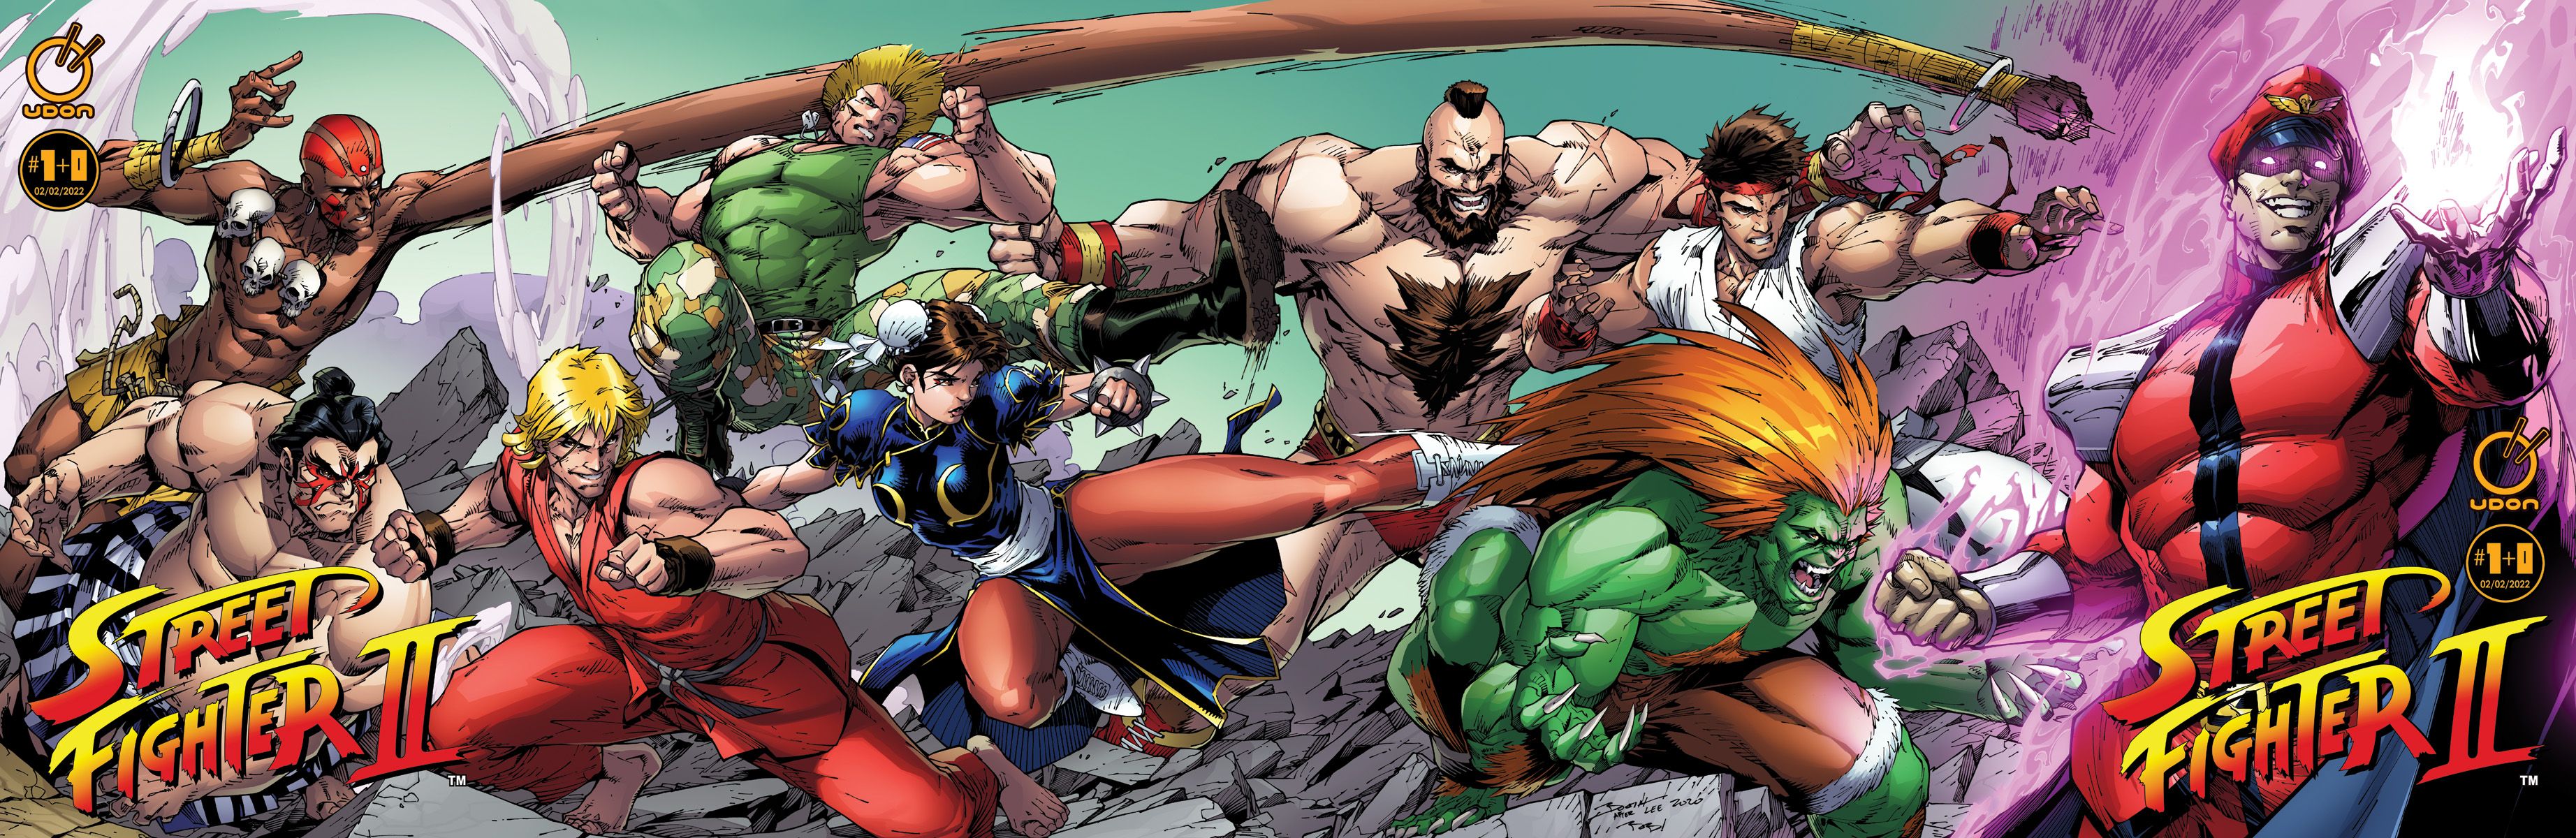 STREET FIGHTER II #1+0 cover homage to X-Men #1